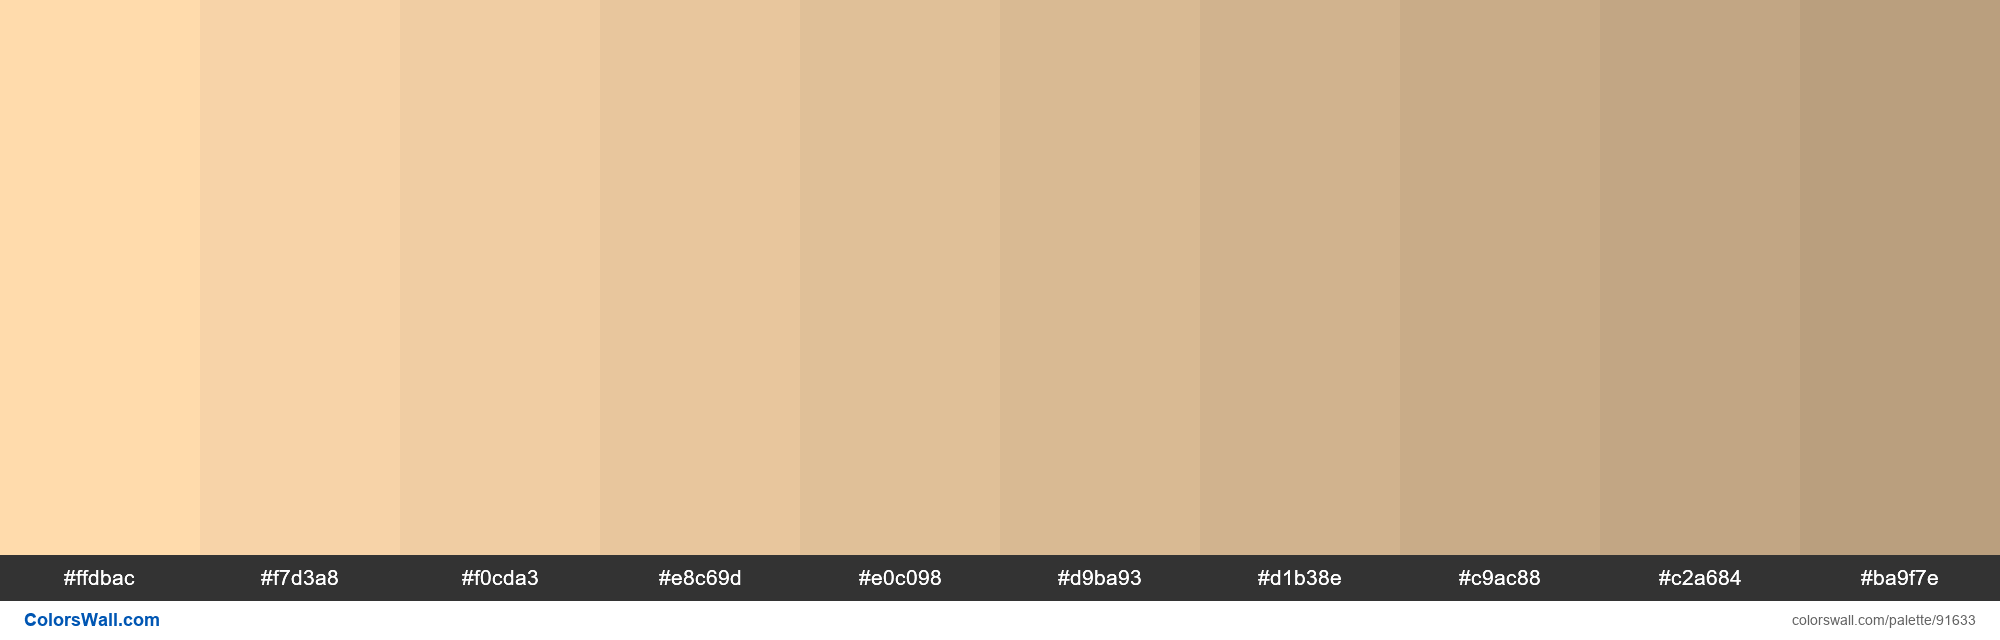 Beautiful Skin Tone Color Palettes [Hex Codes Included], 58% OFF